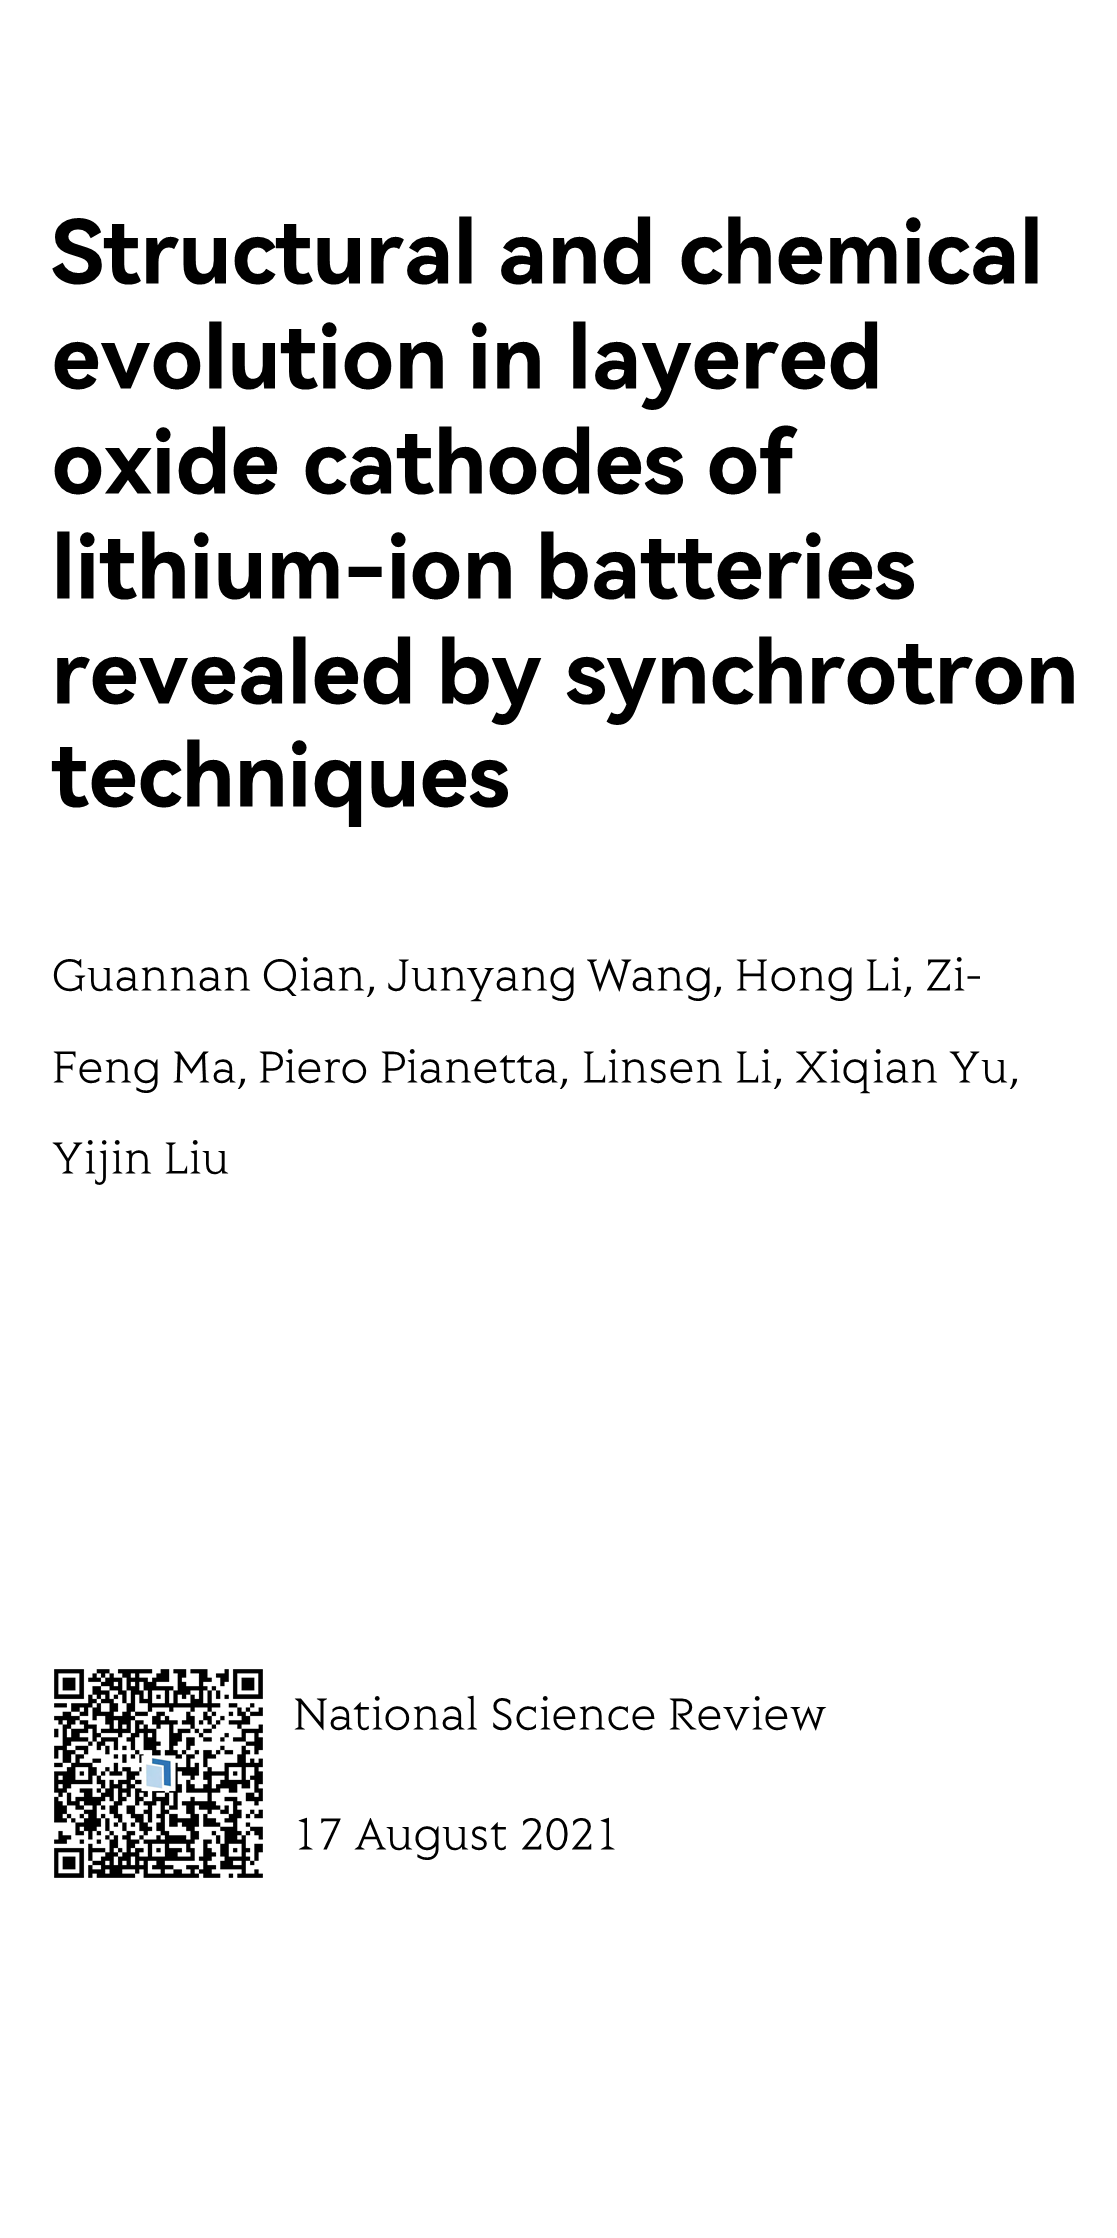 Structural and chemical evolution in layered oxide cathodes of lithium-ion batteries revealed by synchrotron techniques_1